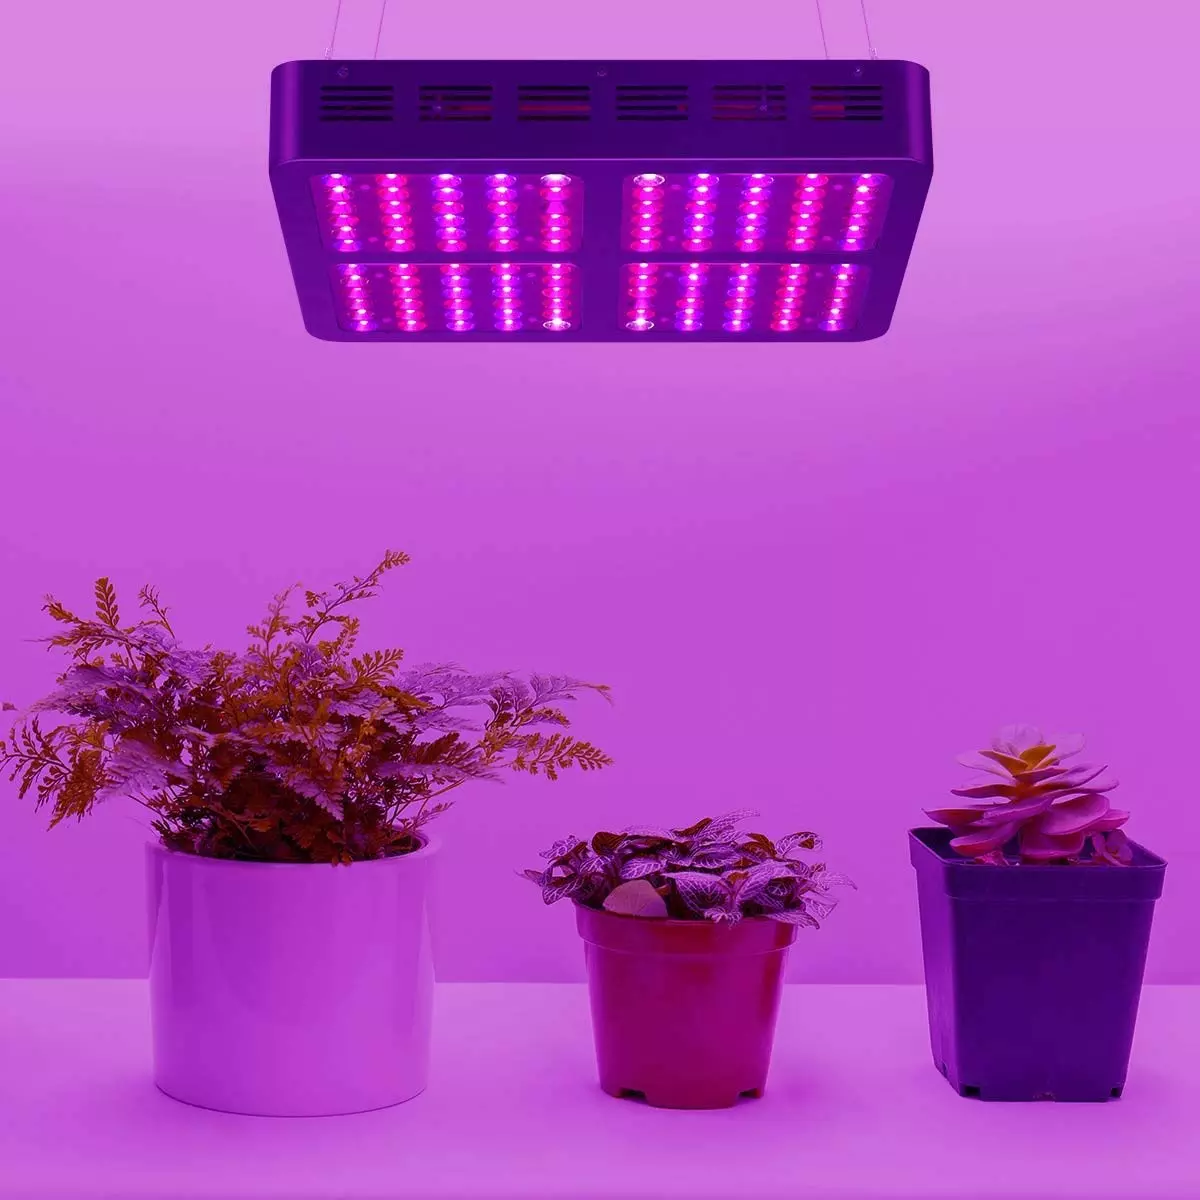 Reflector 1200W LED Grow Light Panel Full Spectrum Indoor Garden Hydroponic Lamp with Growth Bloom Switches